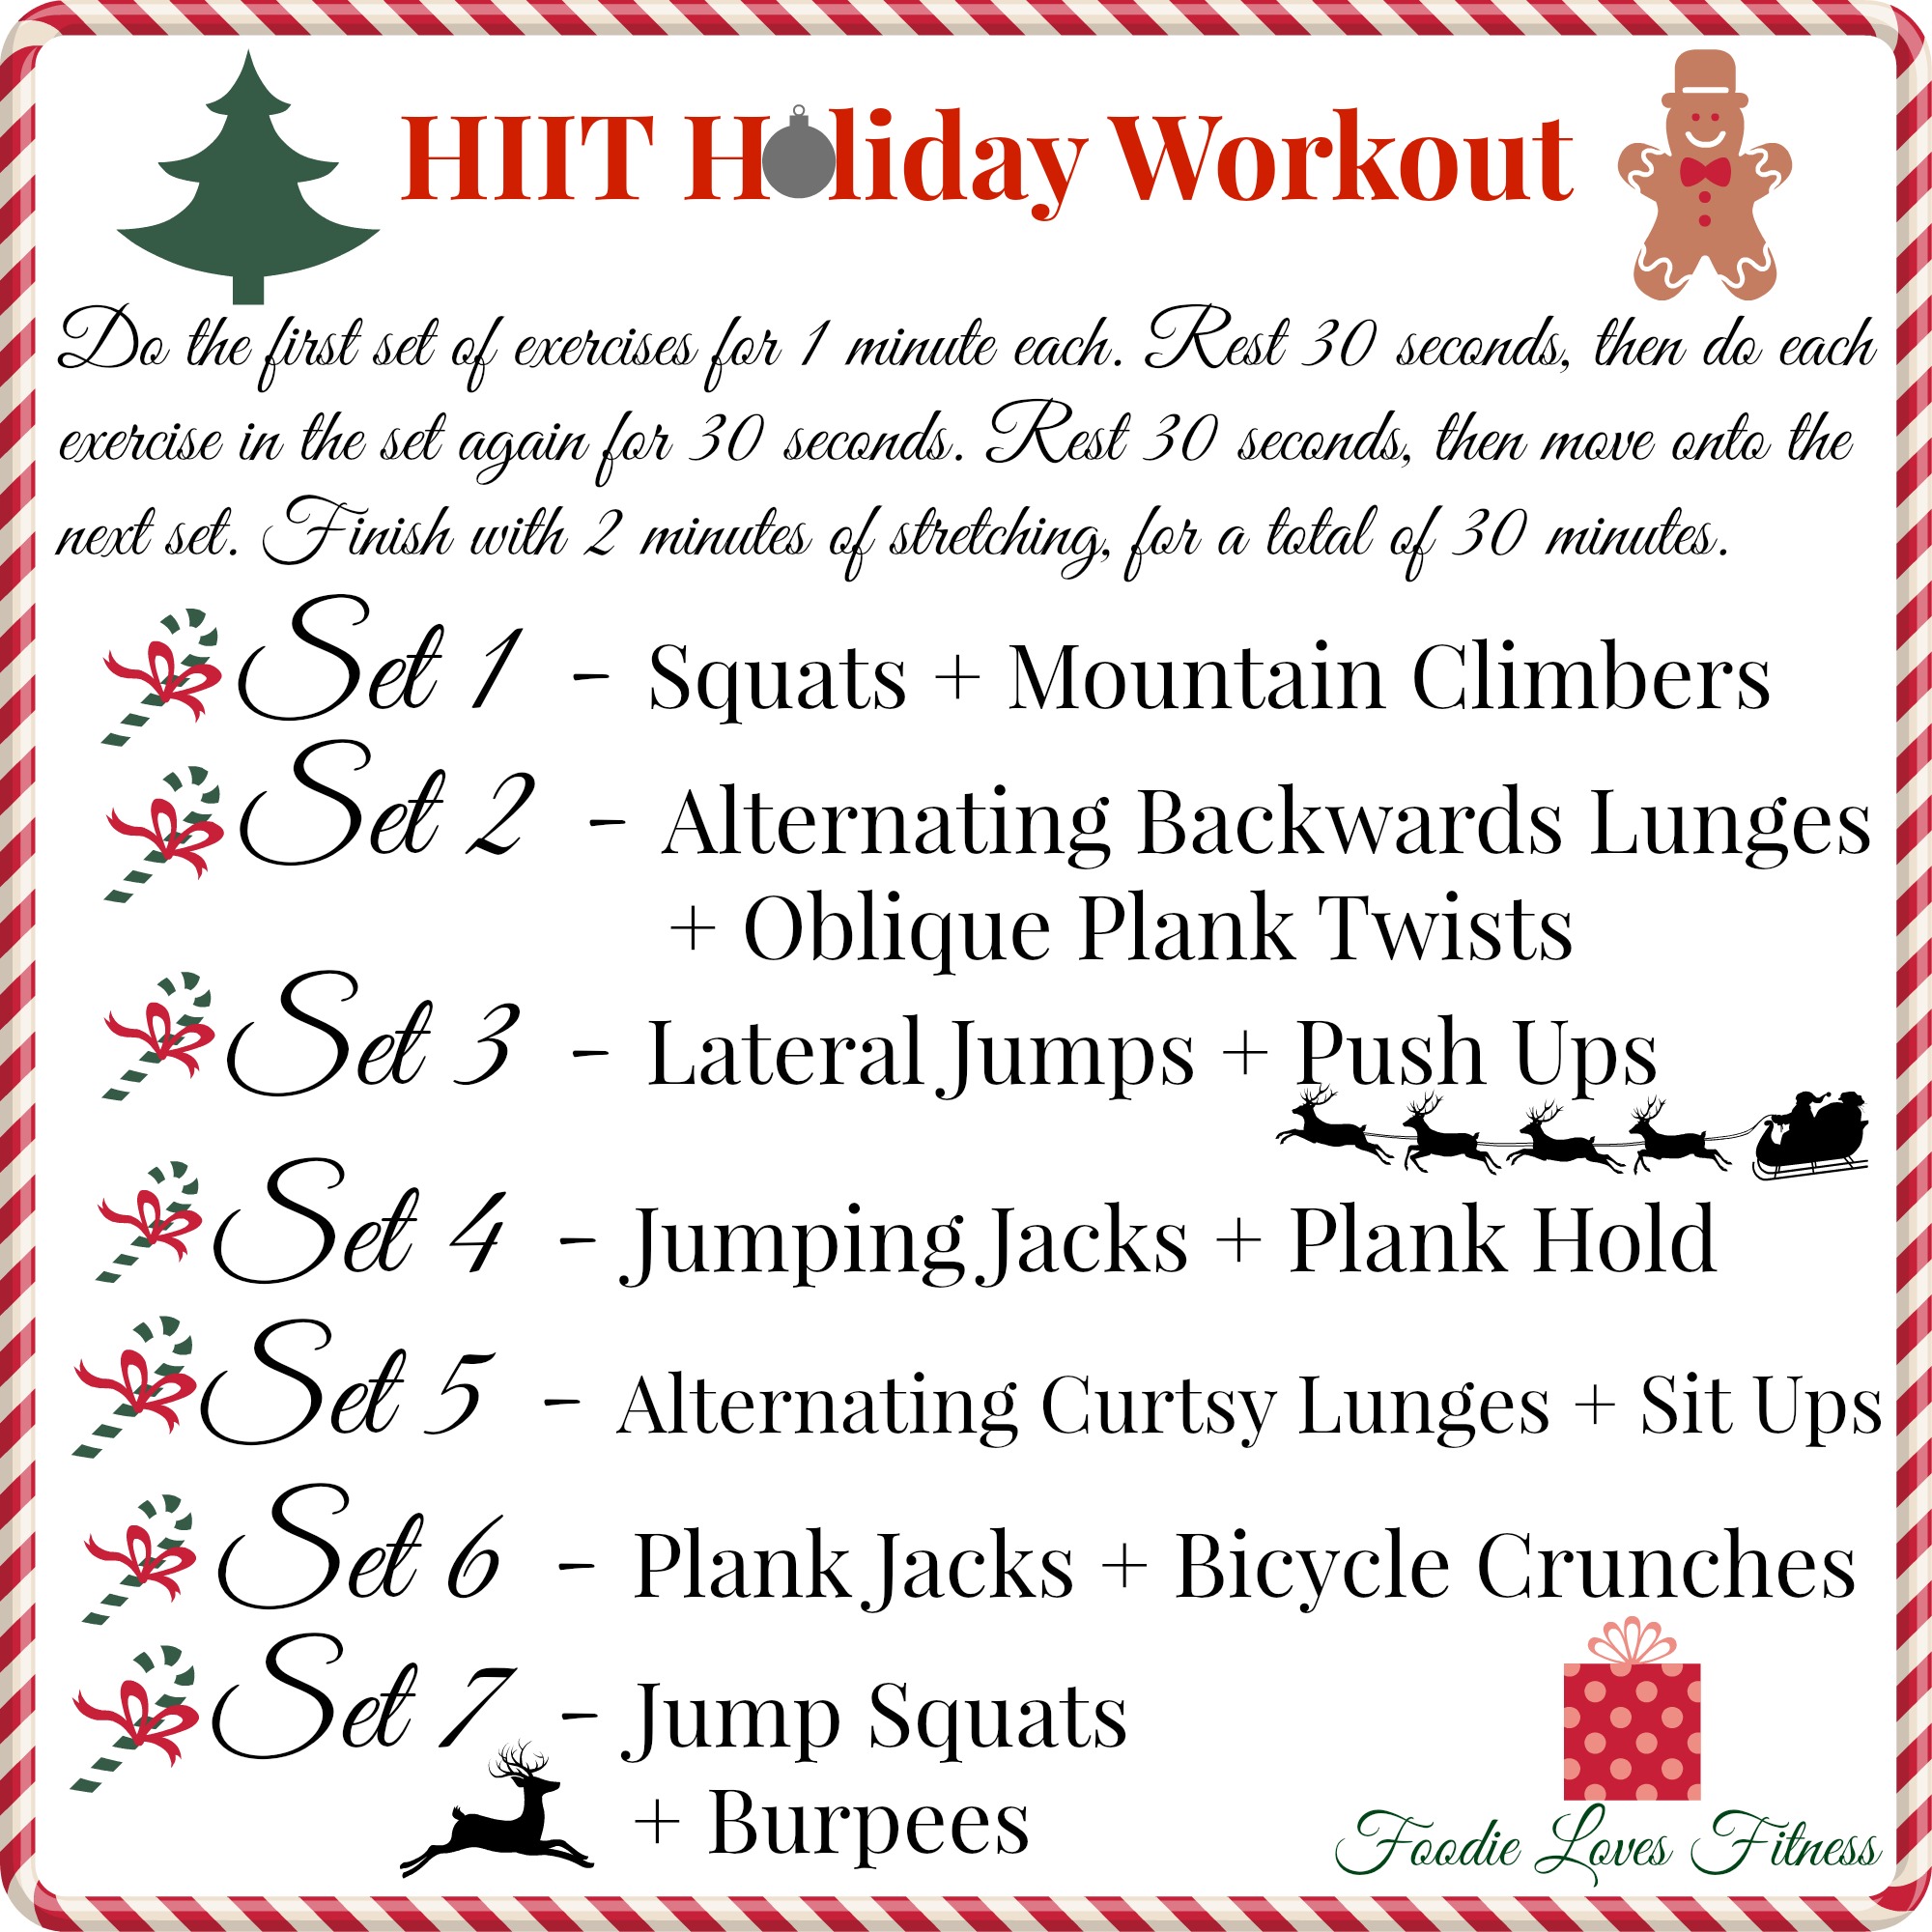 30-minute-hiit-holiday-workout-foodie-loves-fitness